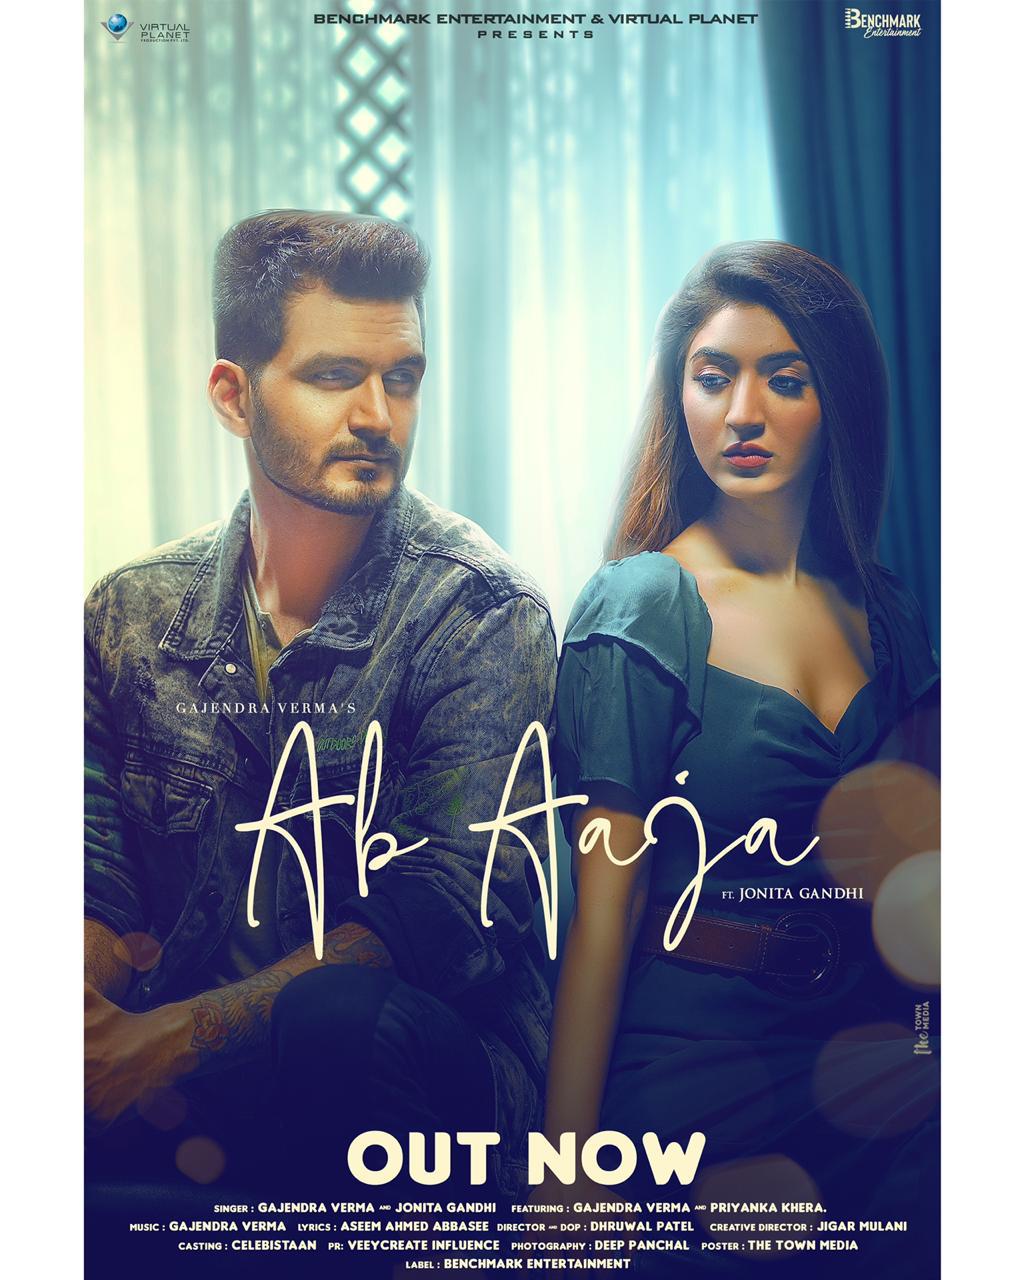 Benchmark Entertainment’s ‘Ab Aaja’ by Gajendra Verma and Jonita Gandhi will leave you mesmerised